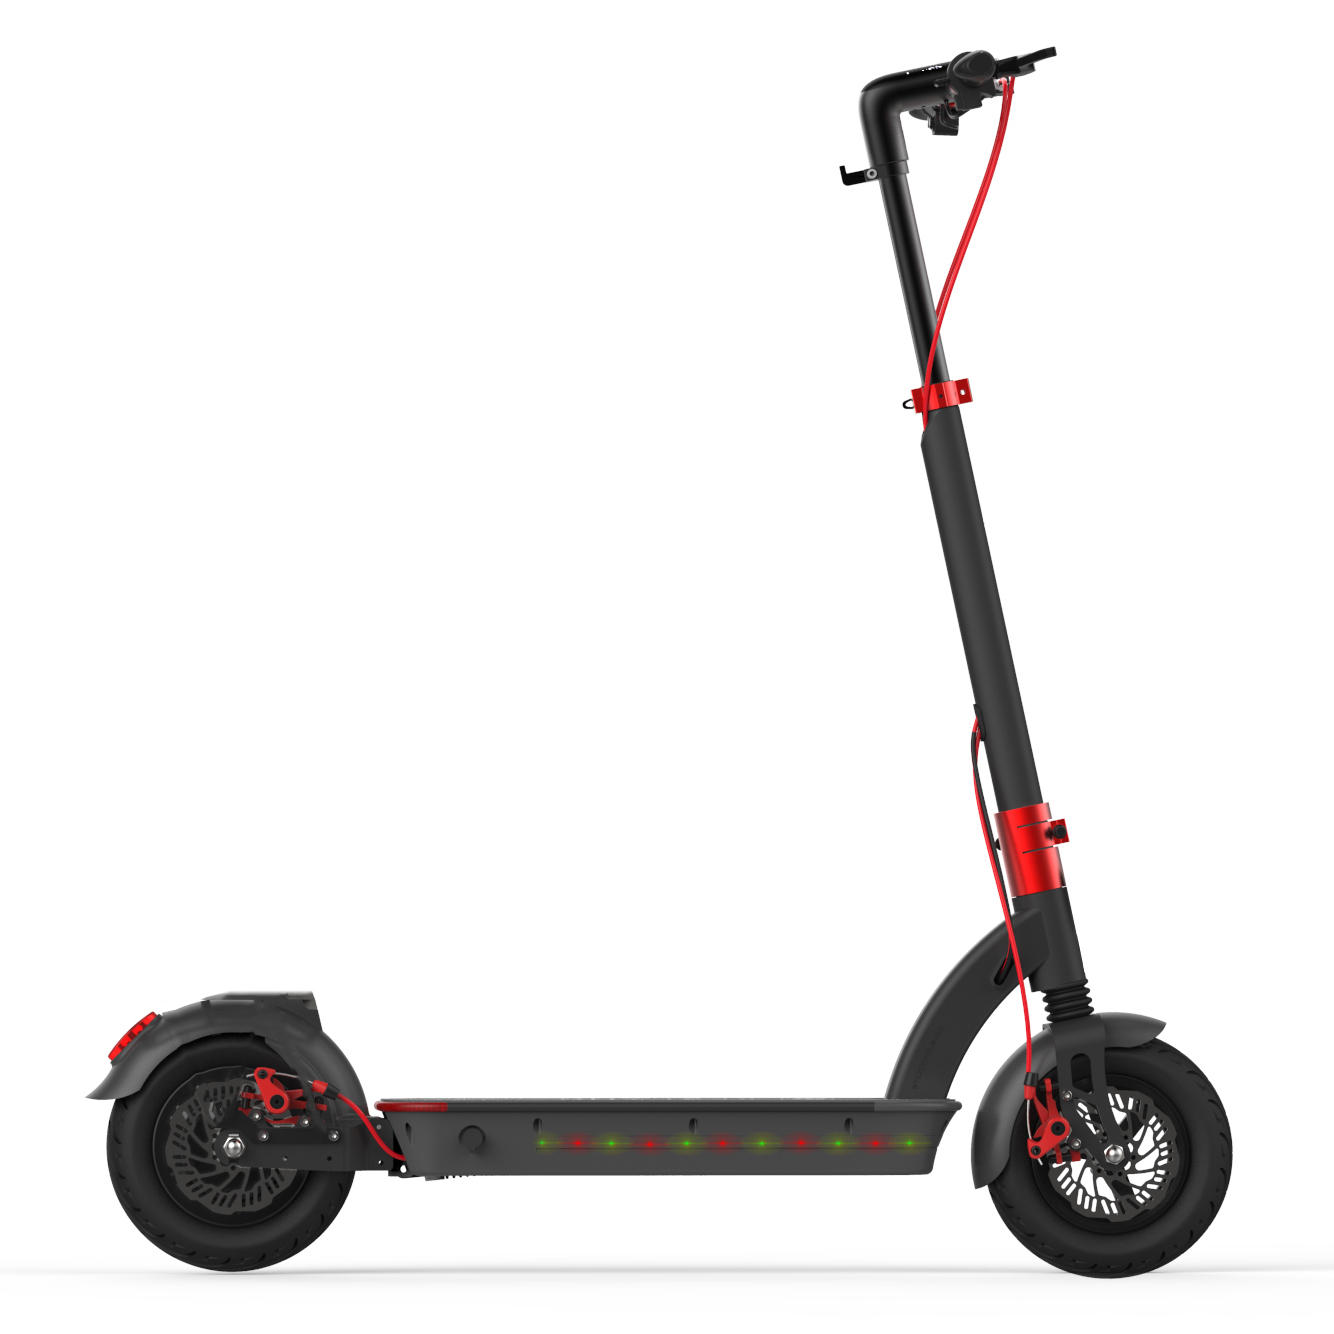 

Aerlang H6 48V 500W 17.5A Folding Electric Scooter 10inch 40km/h Top Speed 50-60km Mileage Range Max. Load 120kg Two Wheels Electric Scooter